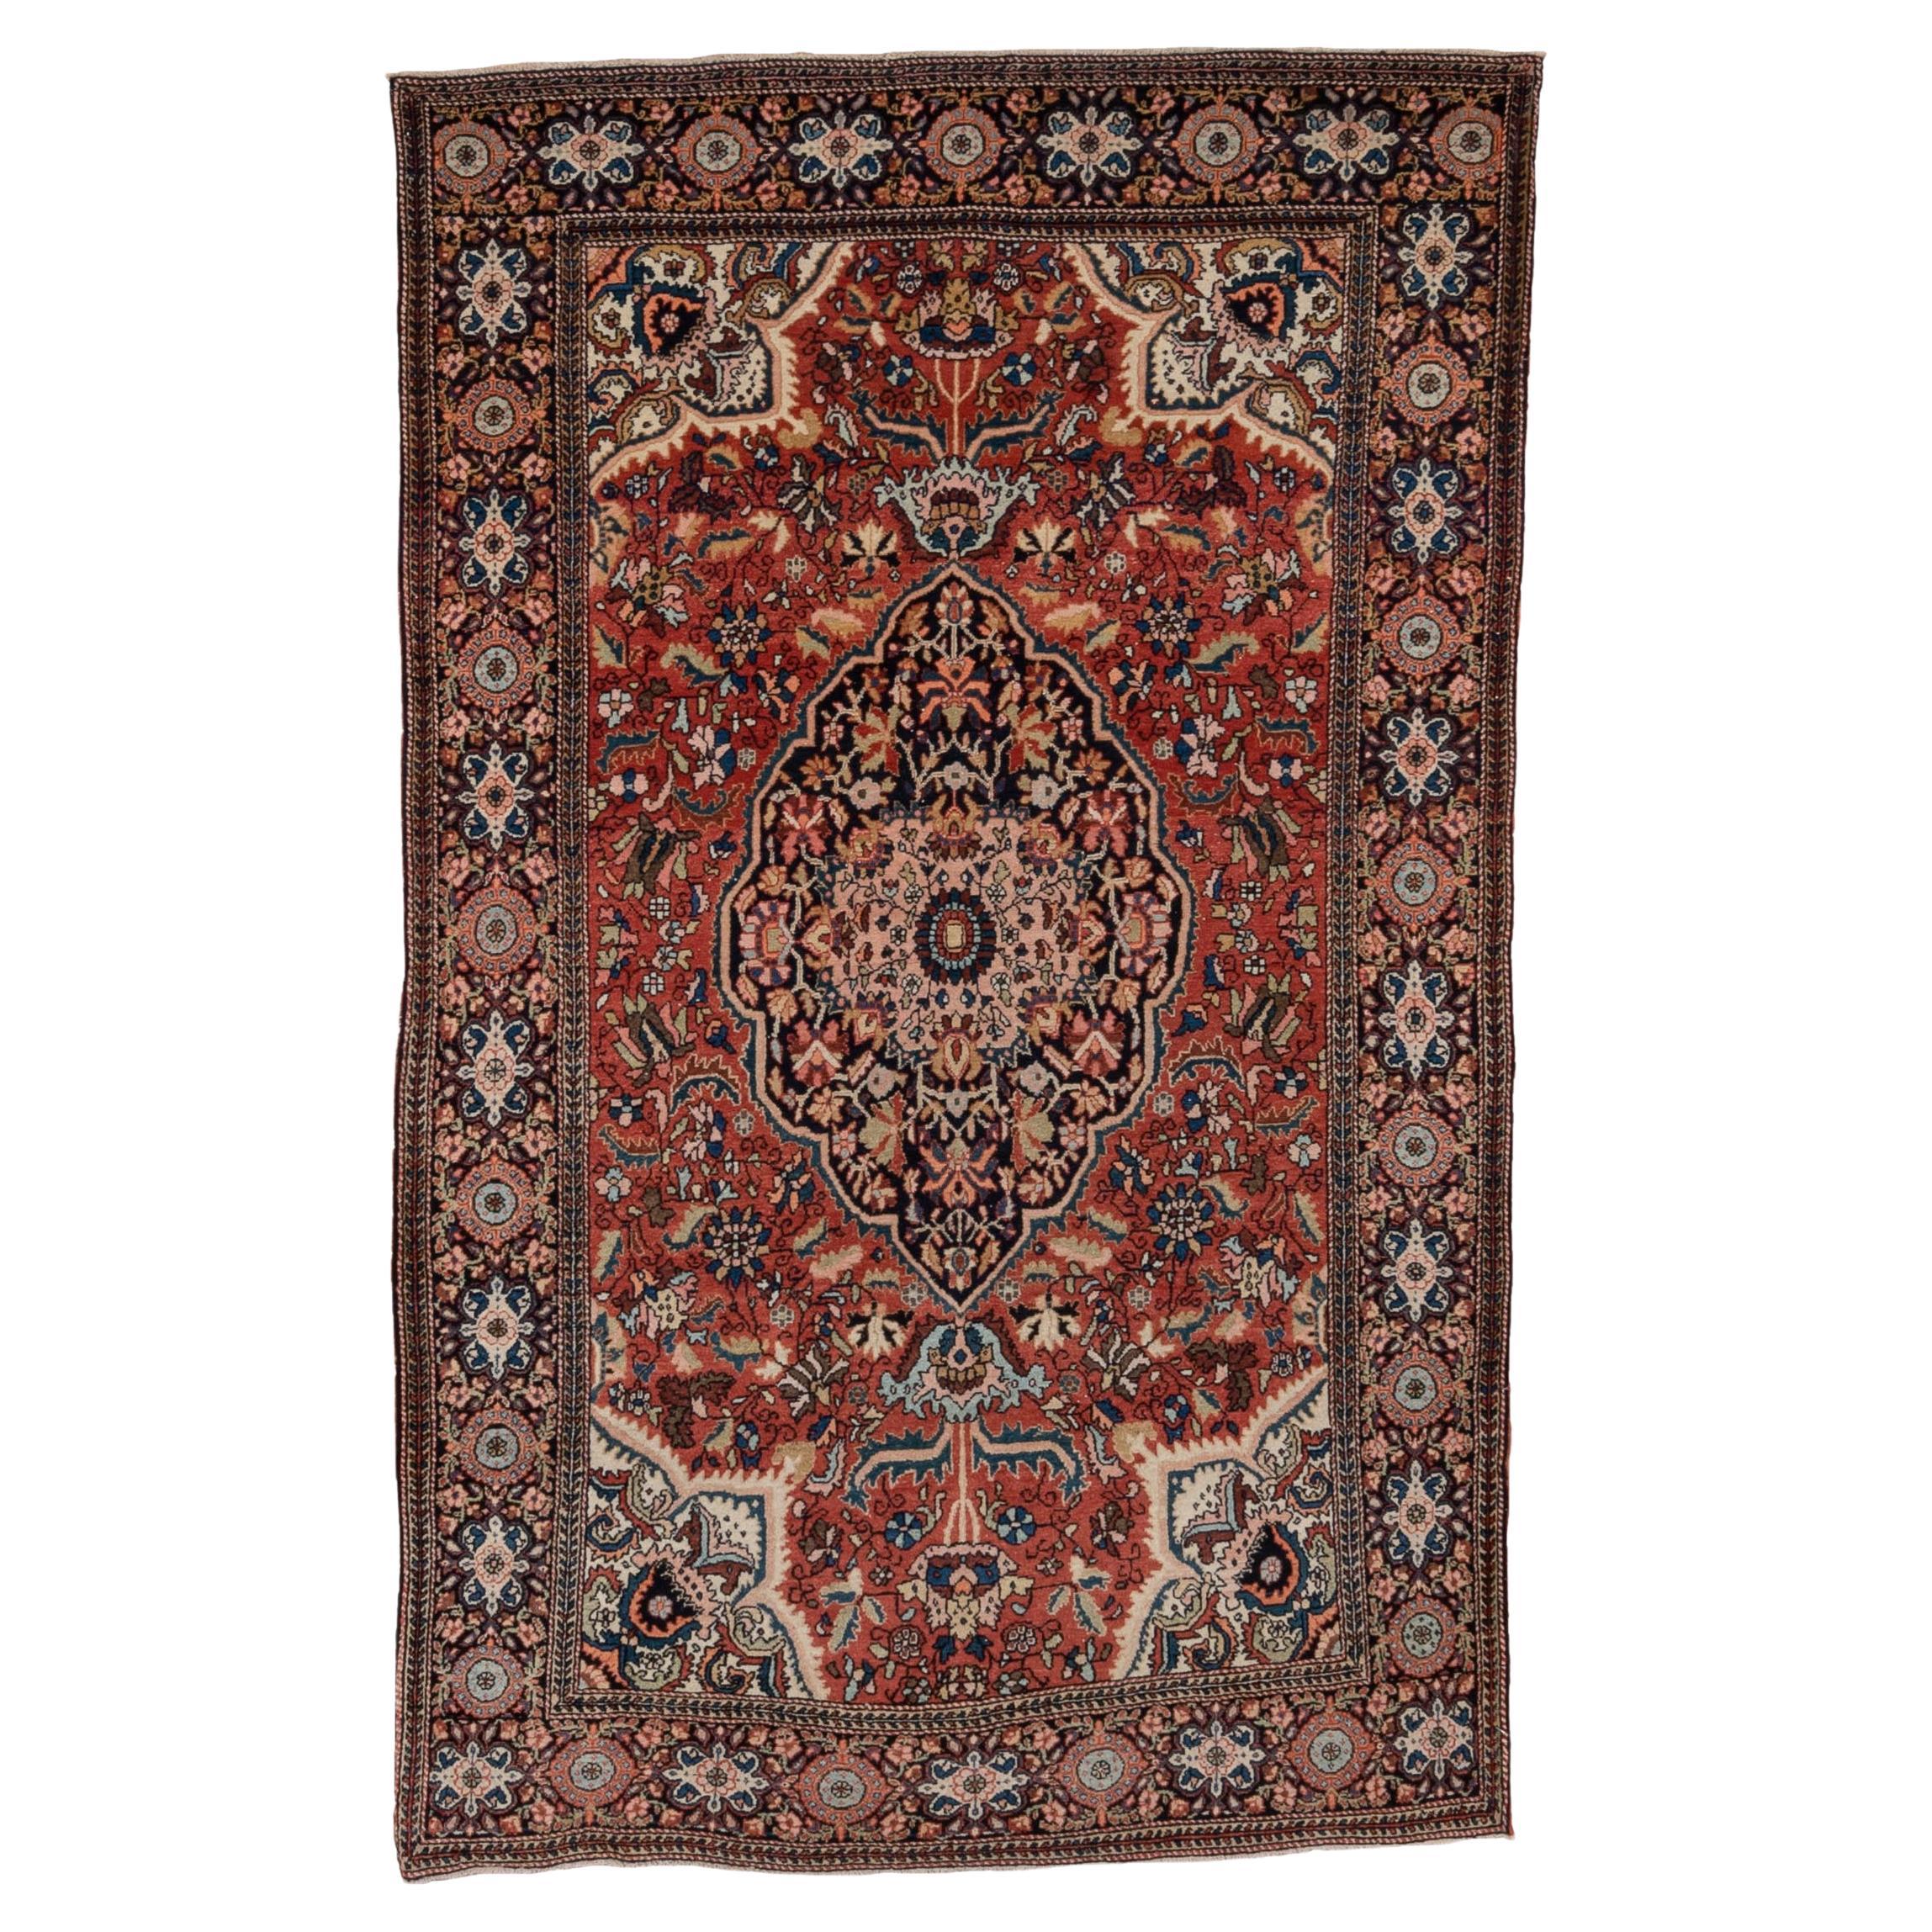 Far Sarouk Central Medallion in Bold Red with Ornate Persian Inspired Detailing For Sale